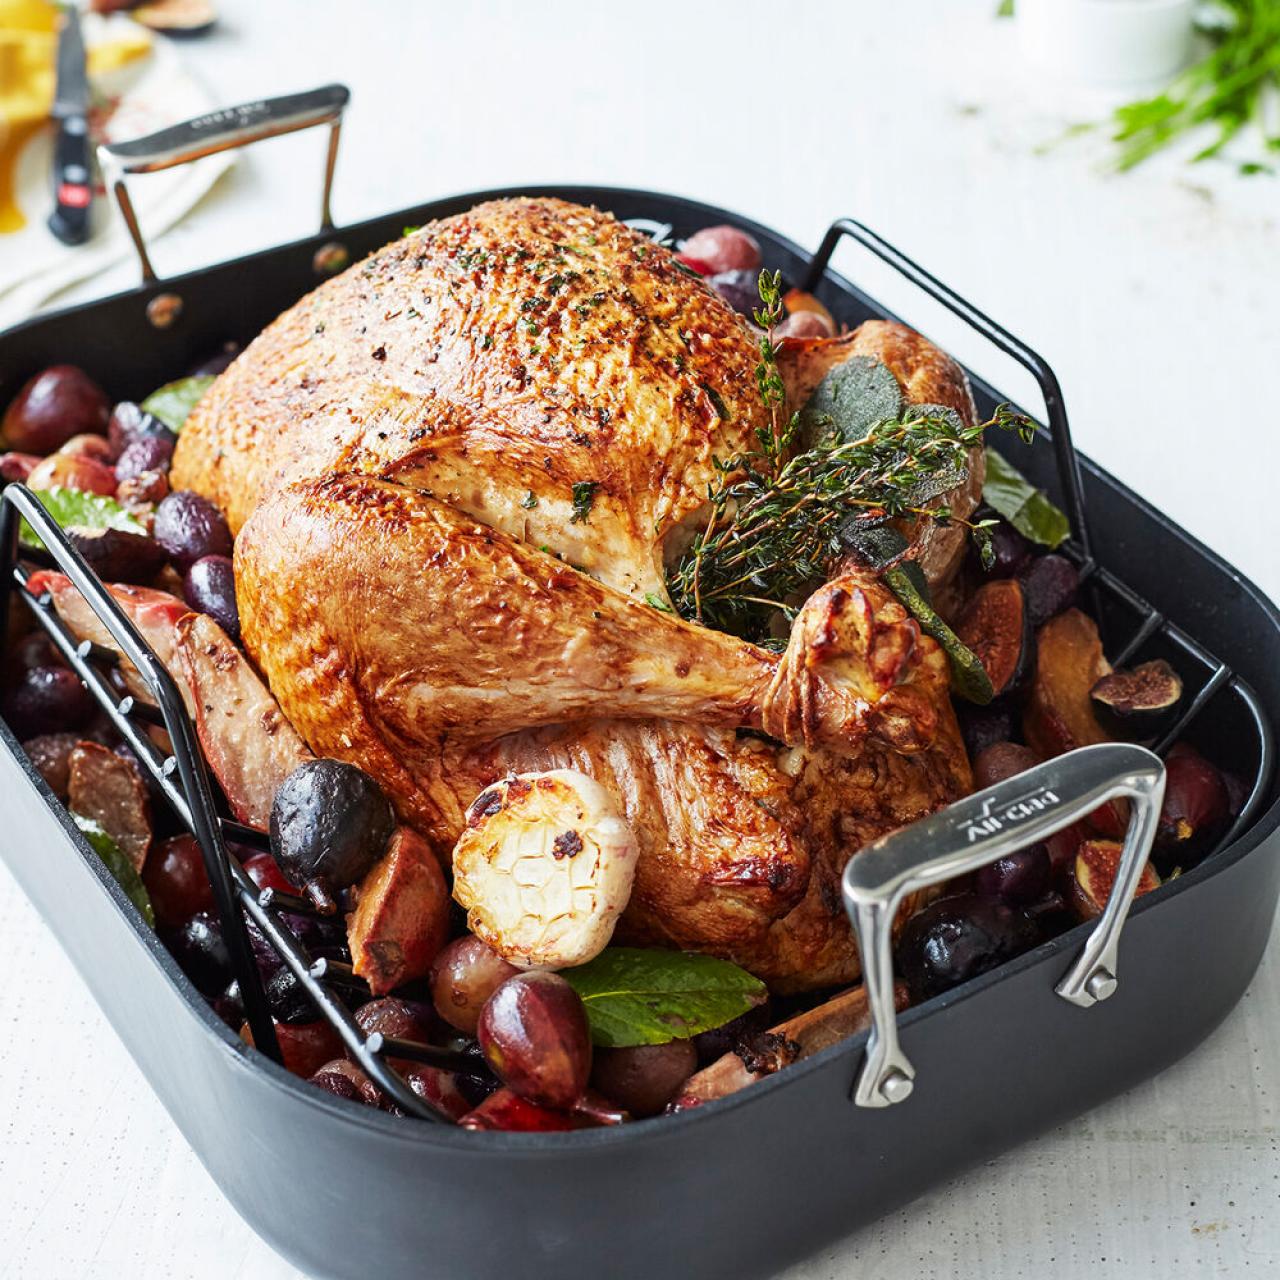 https://food.fnr.sndimg.com/content/dam/images/food/products/2019/9/26/rx_all-clad-ha1-nonstick-roasting-pan-with-rack.jpeg.rend.hgtvcom.1280.1280.suffix/1569517412737.jpeg